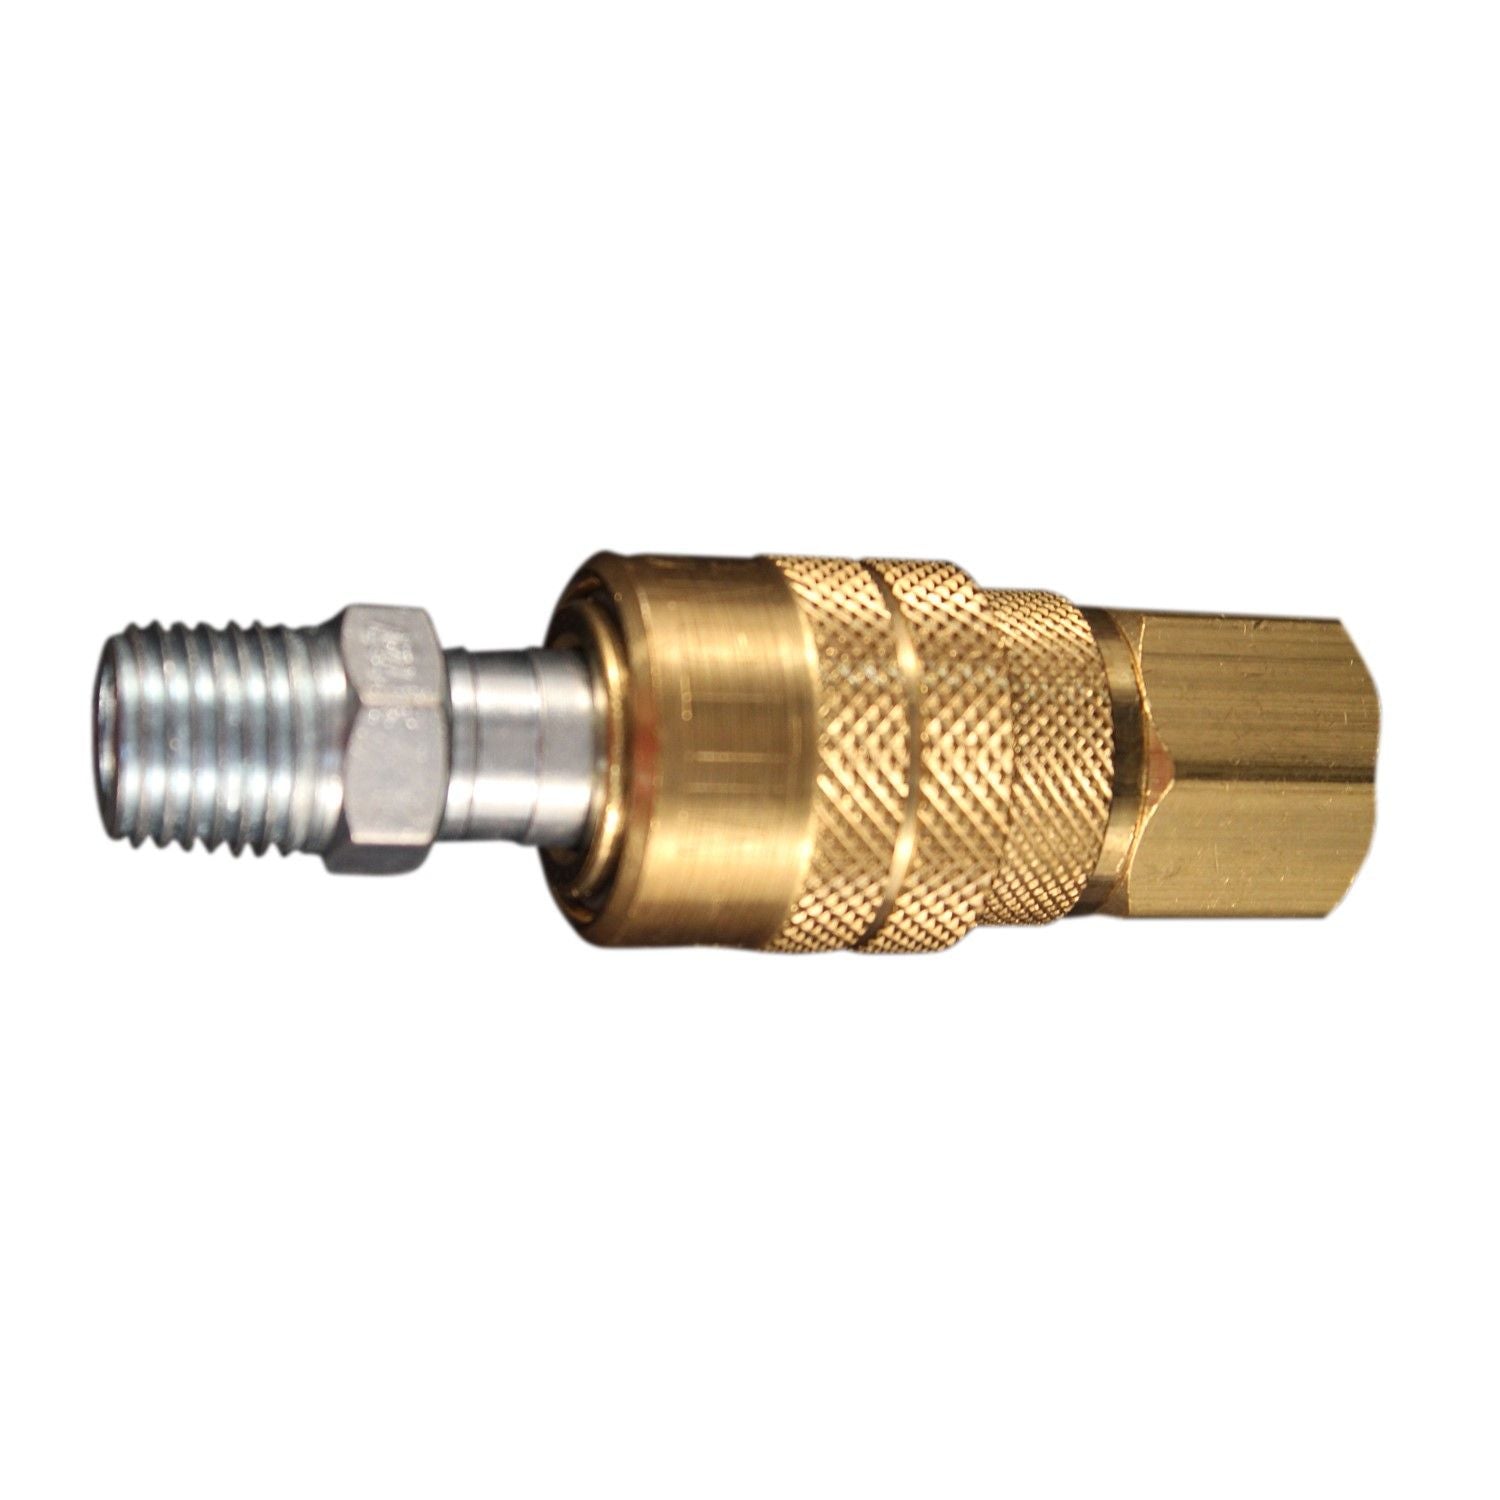 Milton S-711 1/4" NPT M Style Coupler and Plug - Pack of 10